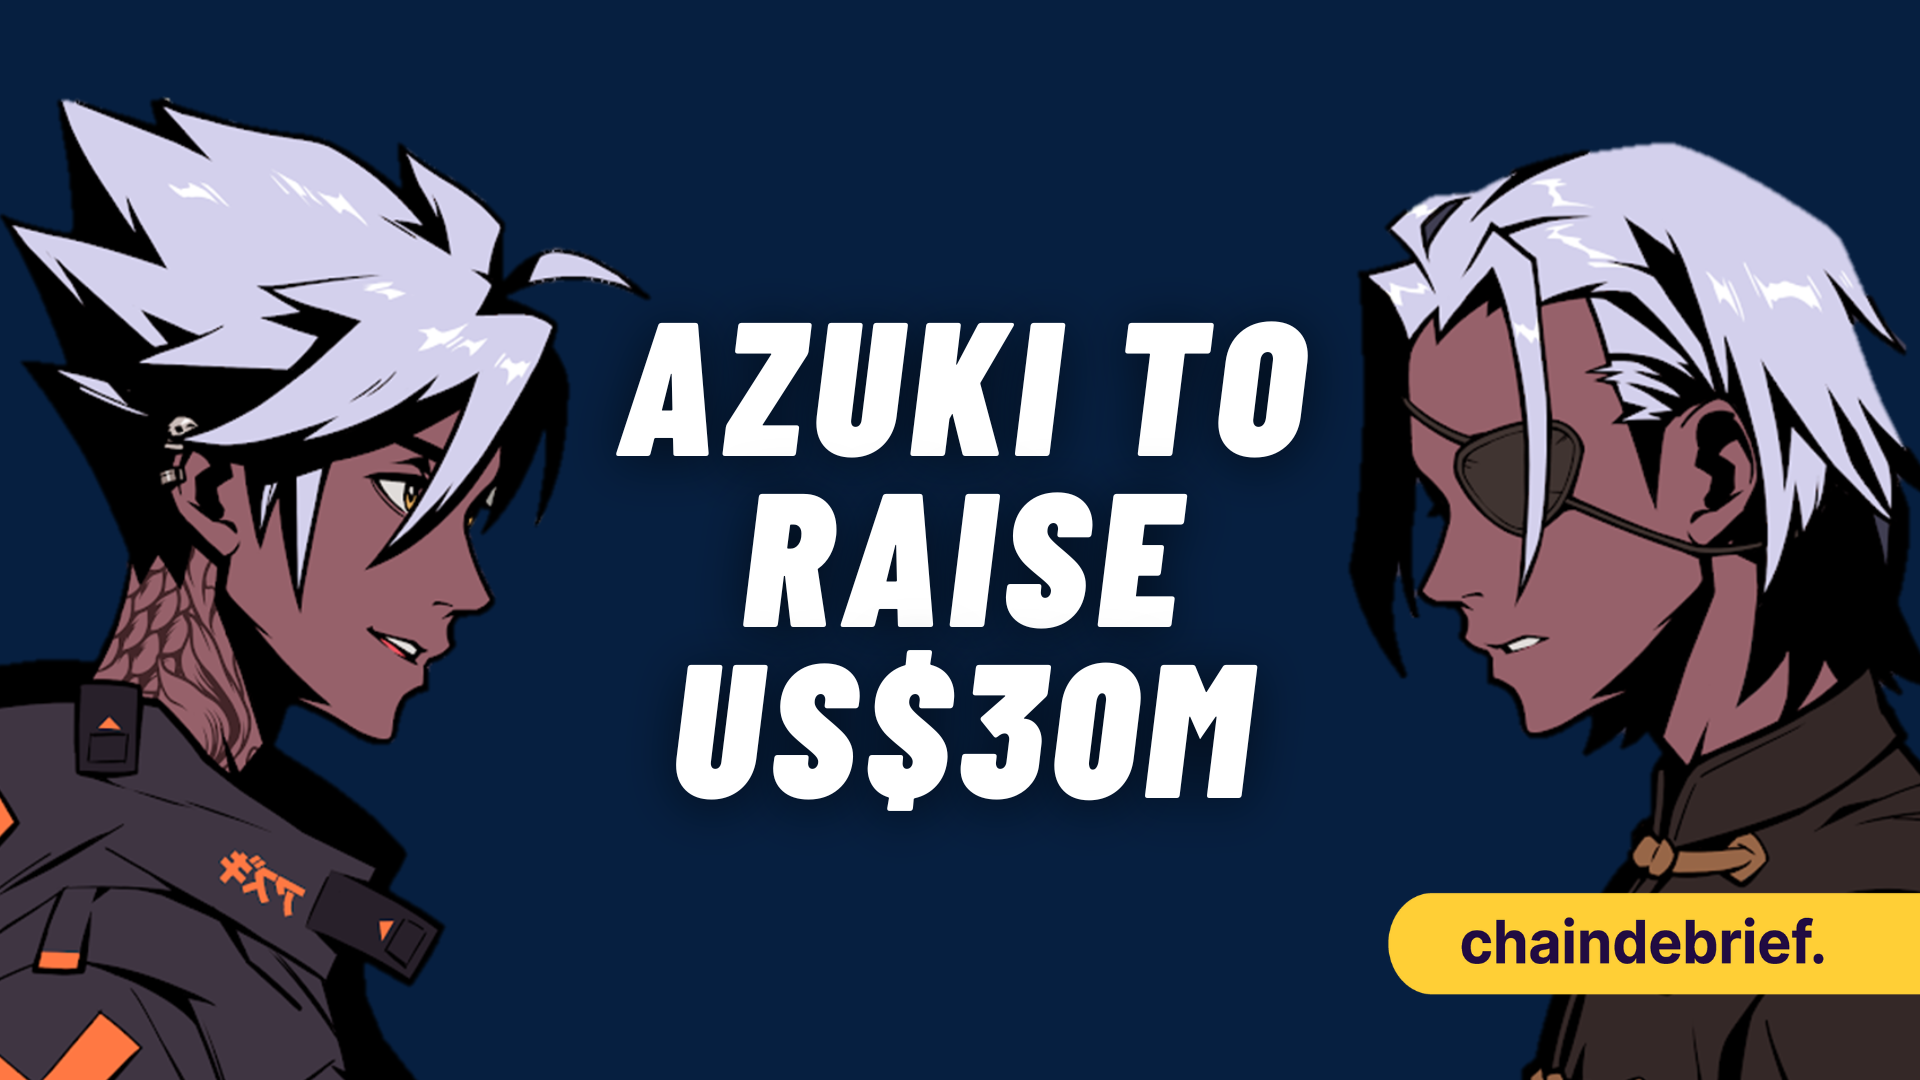 Azuki Following The Footsteps Of Moonbirds And Doodles, Closes In On US$30 Million Fundraise